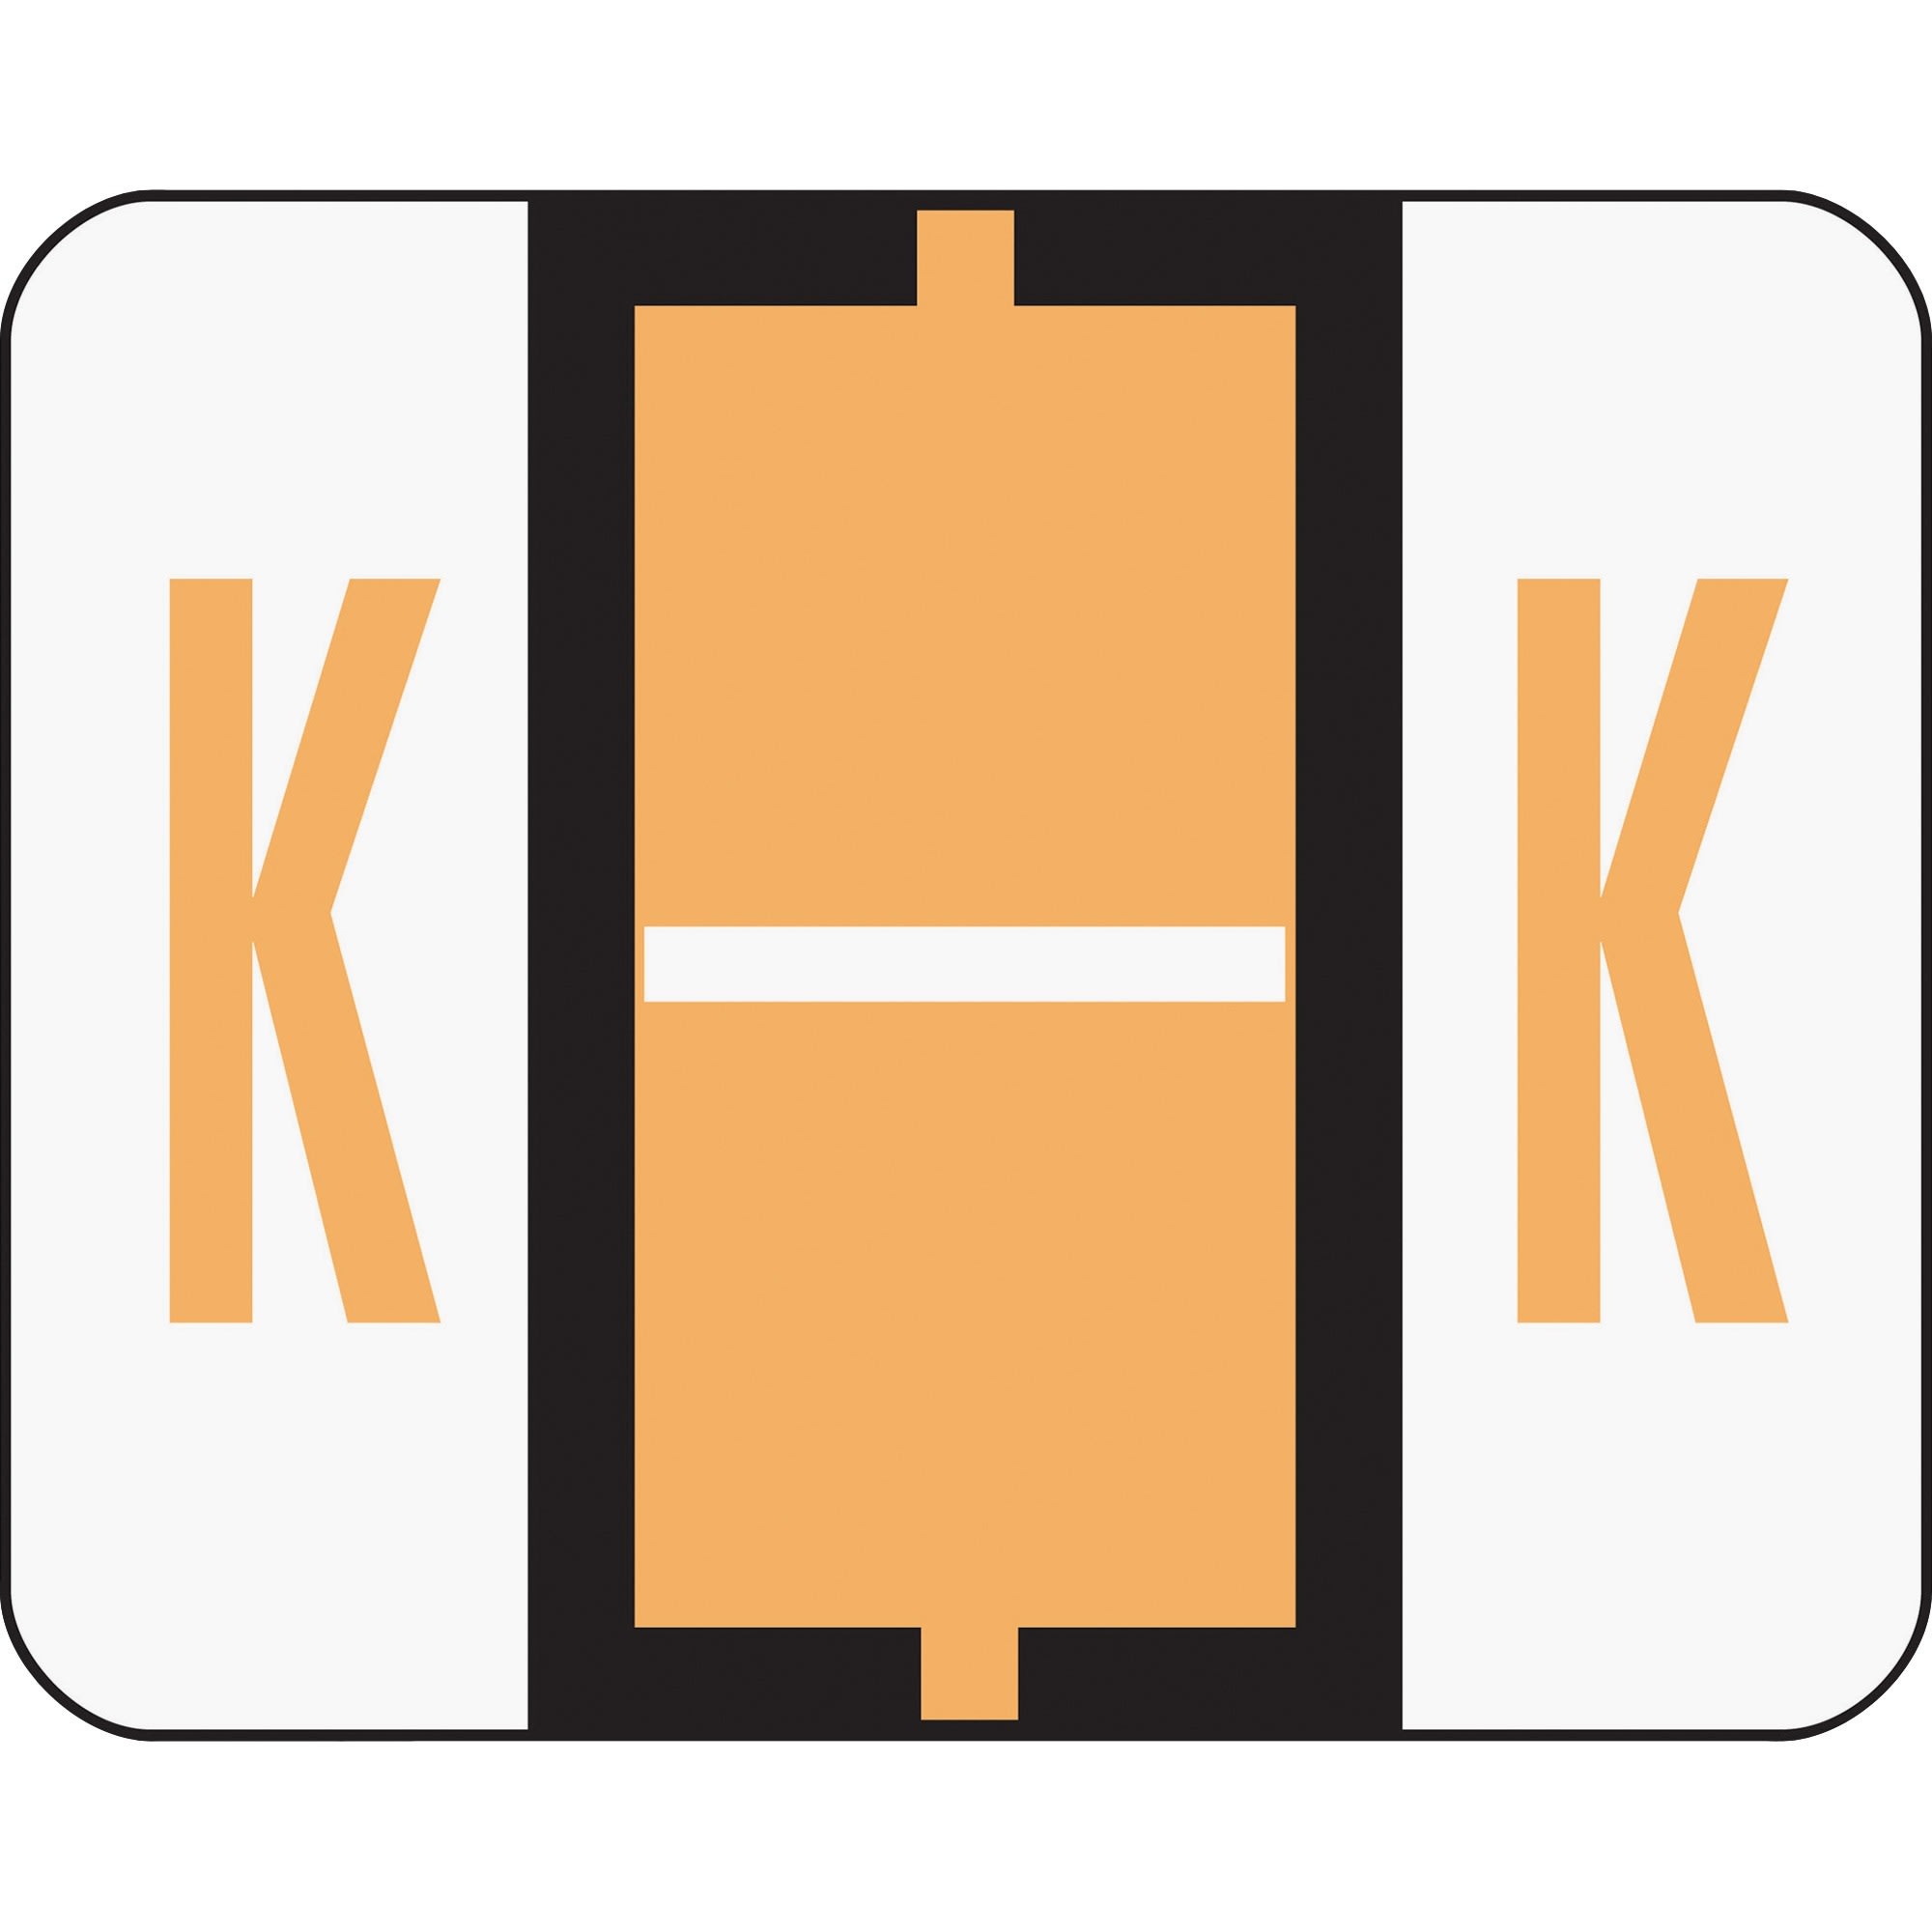 Smead 67081 A-Z Color-Coded Bar-Style End Tab Labels, Letter K, Light Orange, 500/Roll - image 3 of 3